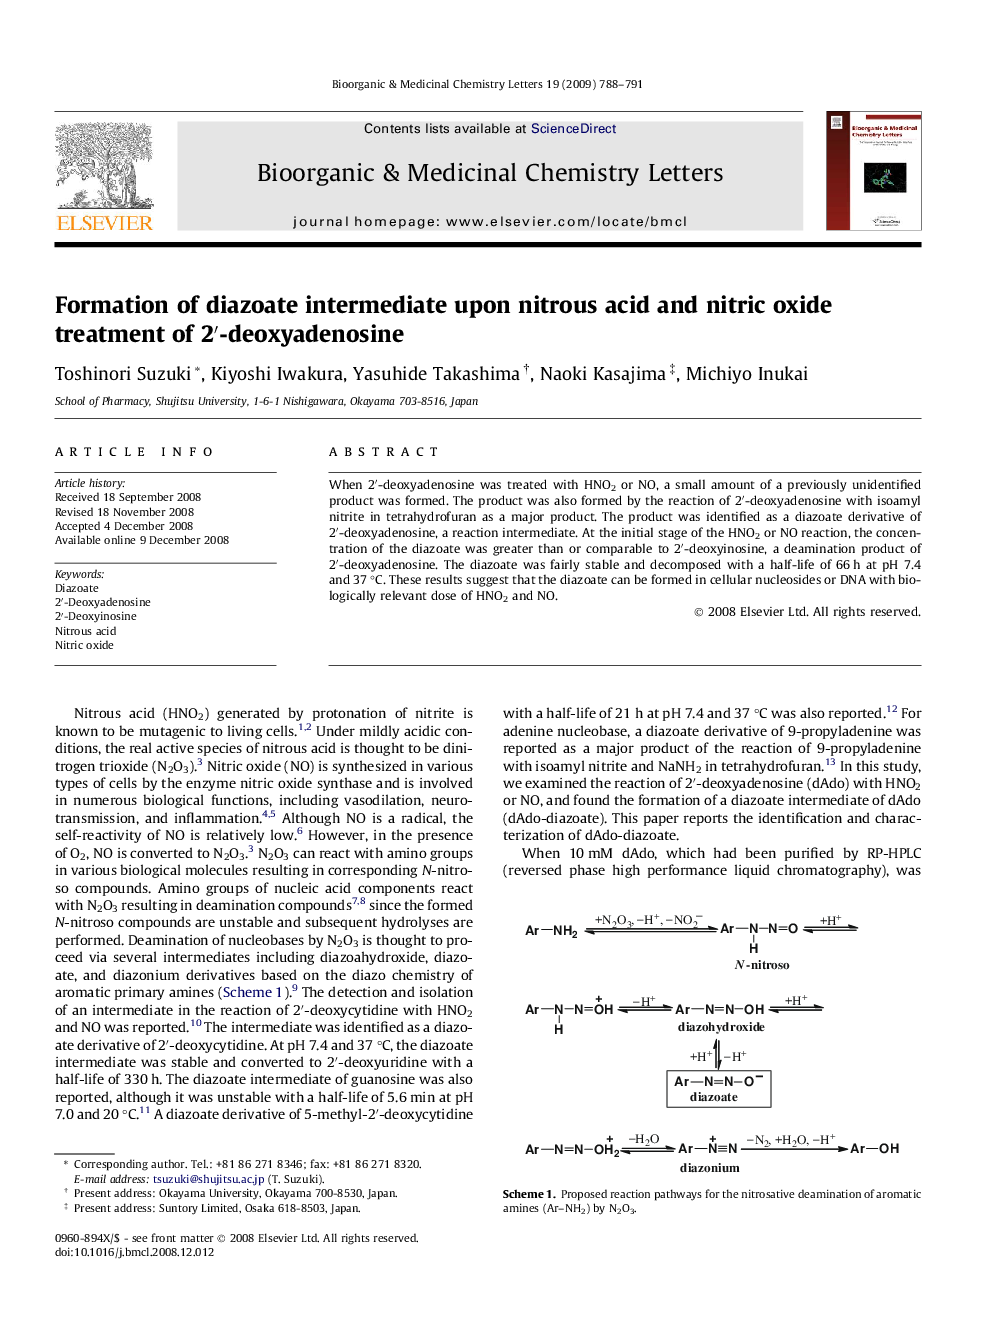 Formation of diazoate intermediate upon nitrous acid and nitric oxide treatment of 2â²-deoxyadenosine